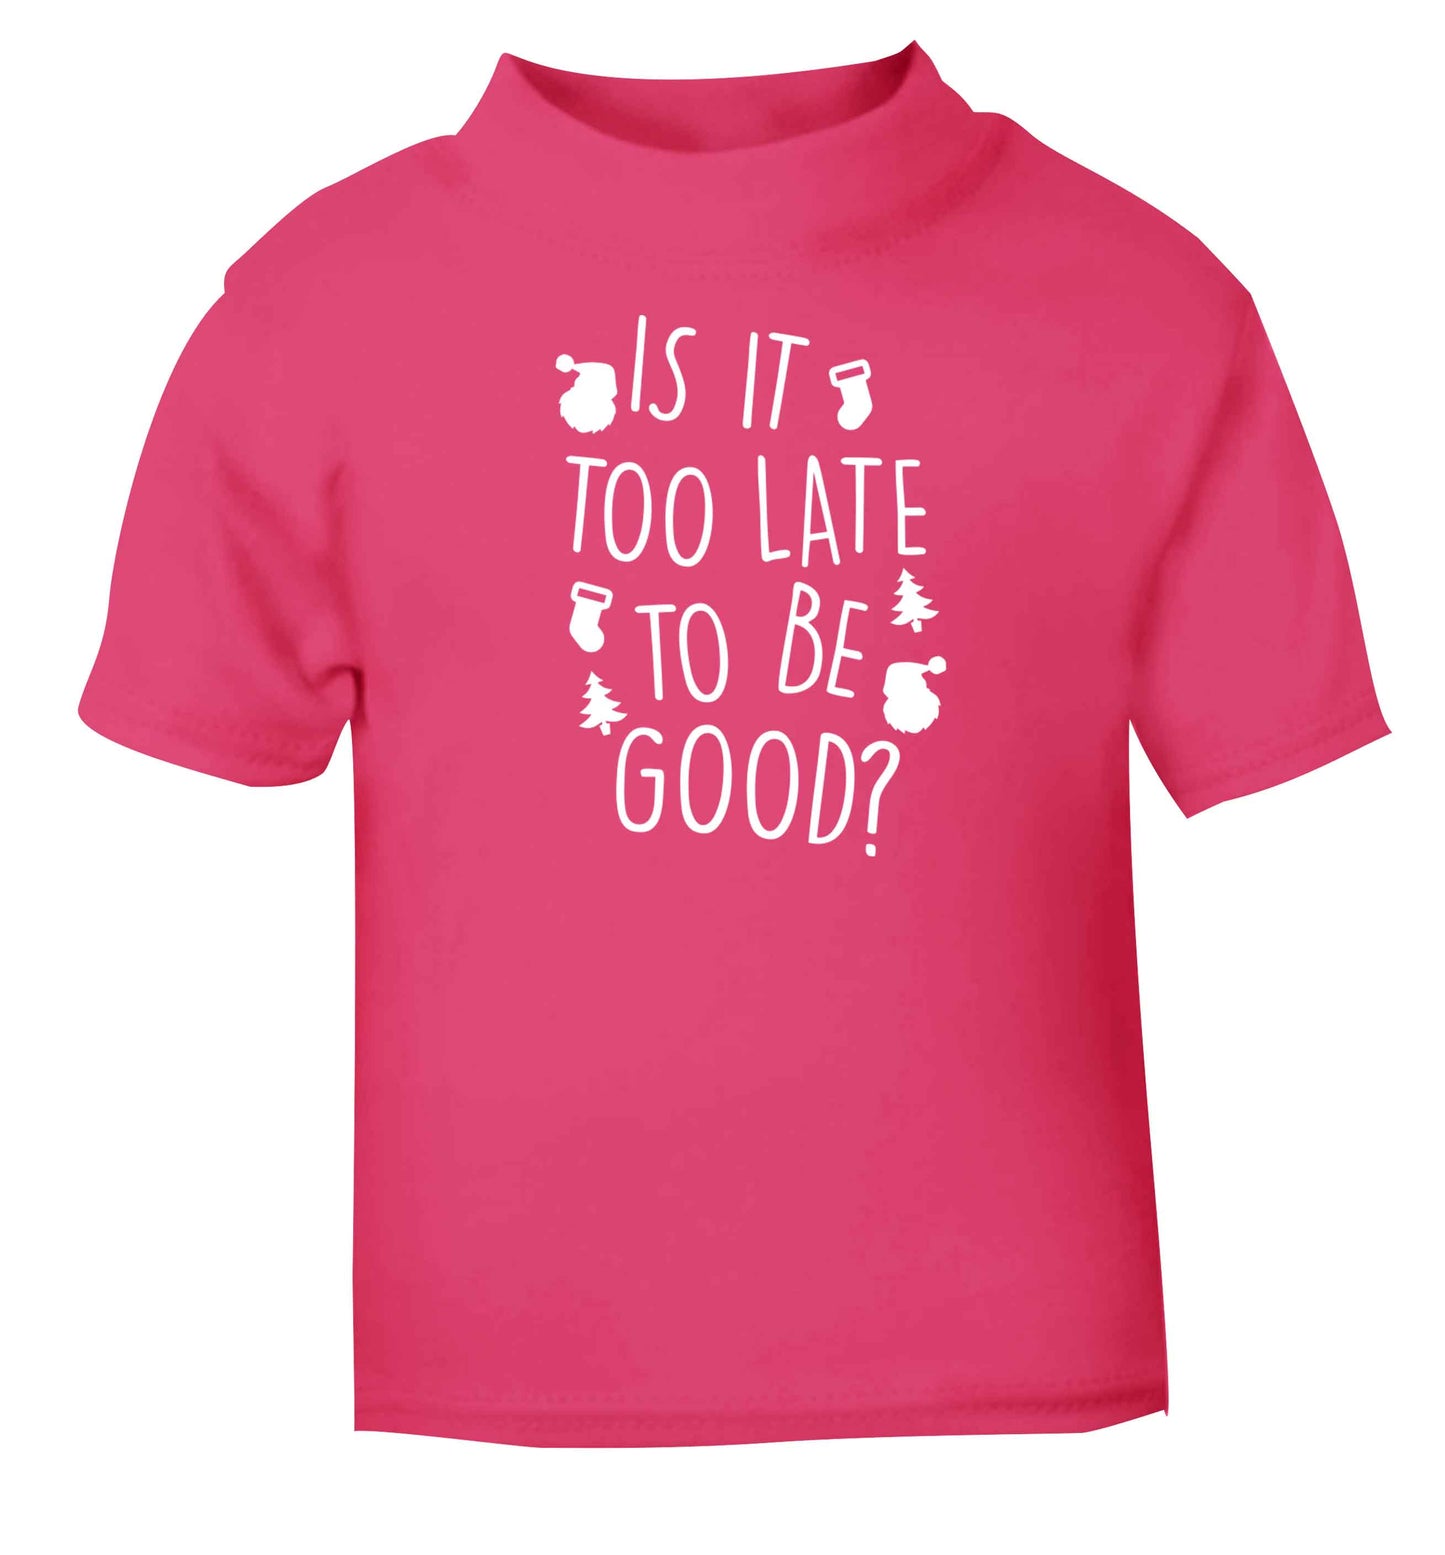 Too Late to be Good pink baby toddler Tshirt 2 Years